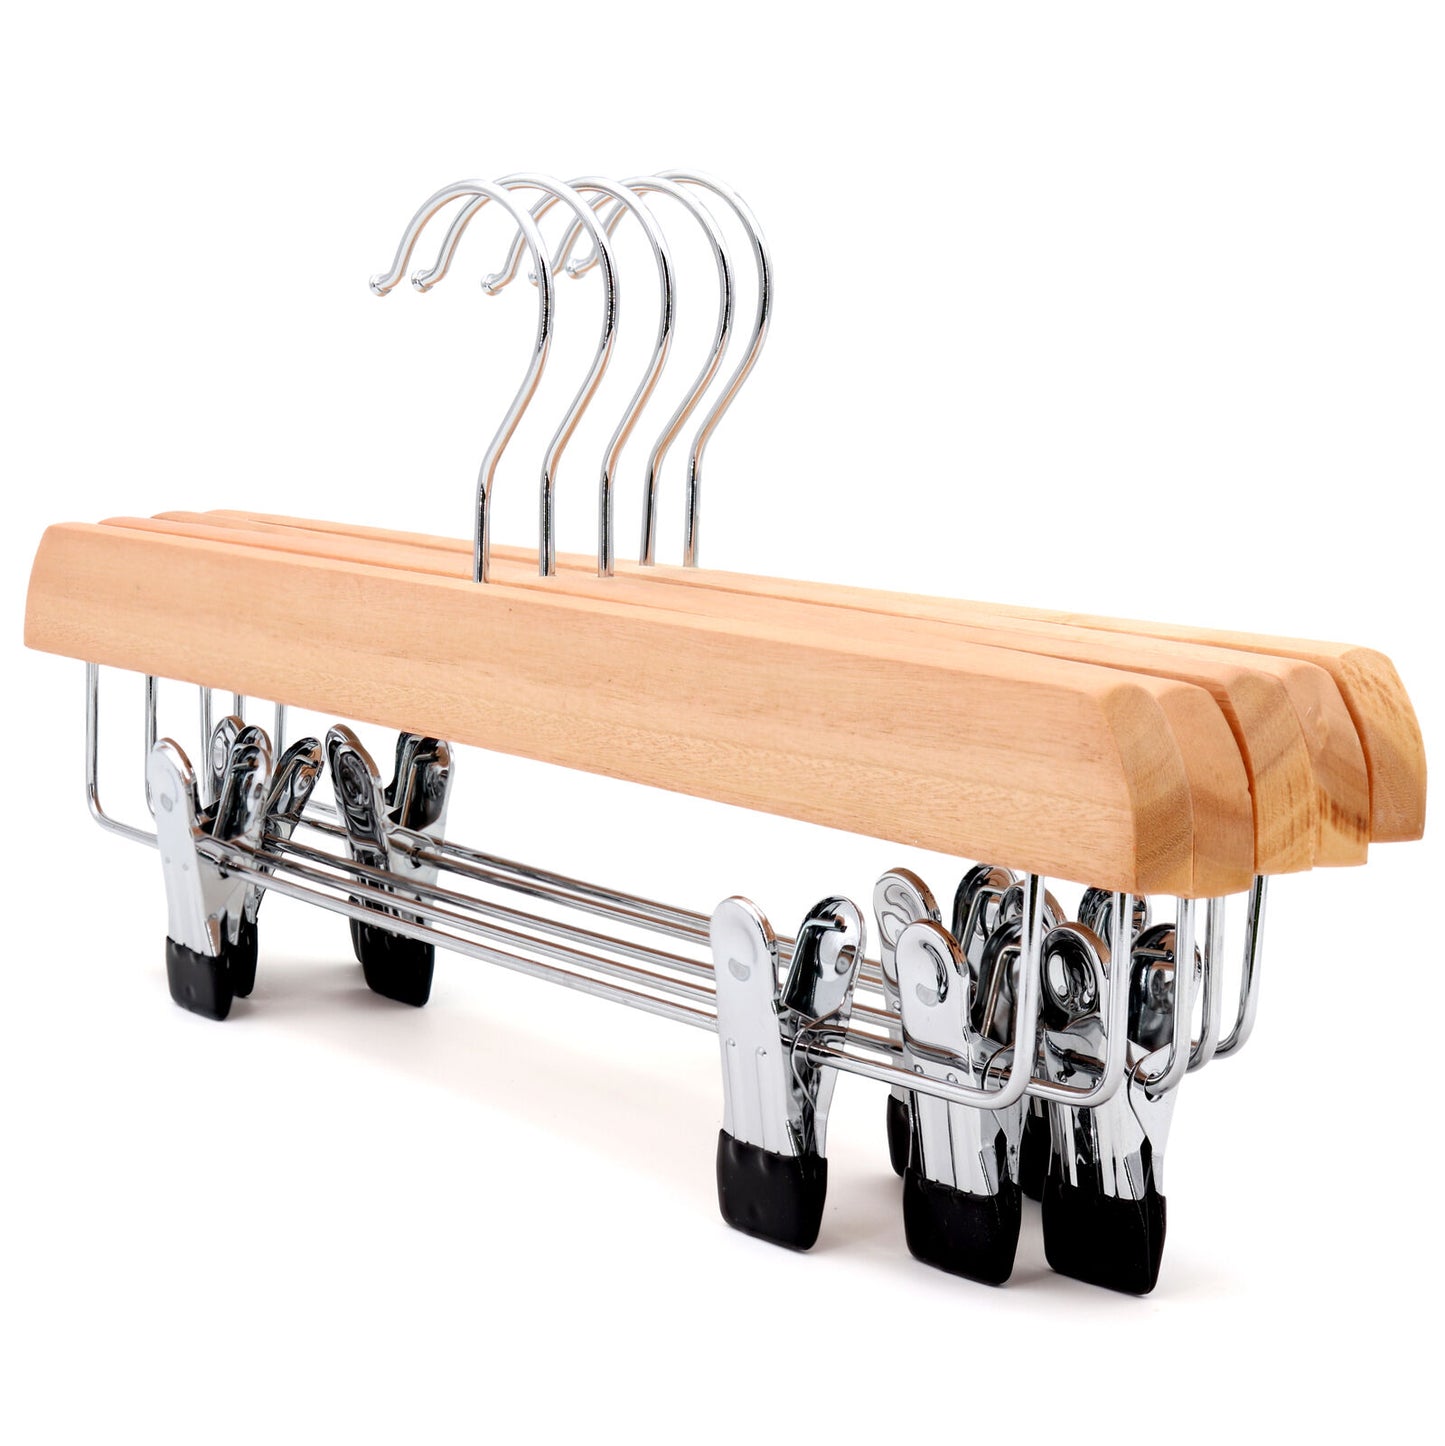 10 Natural Wooden Trouser / Skirt Hangers With Clips